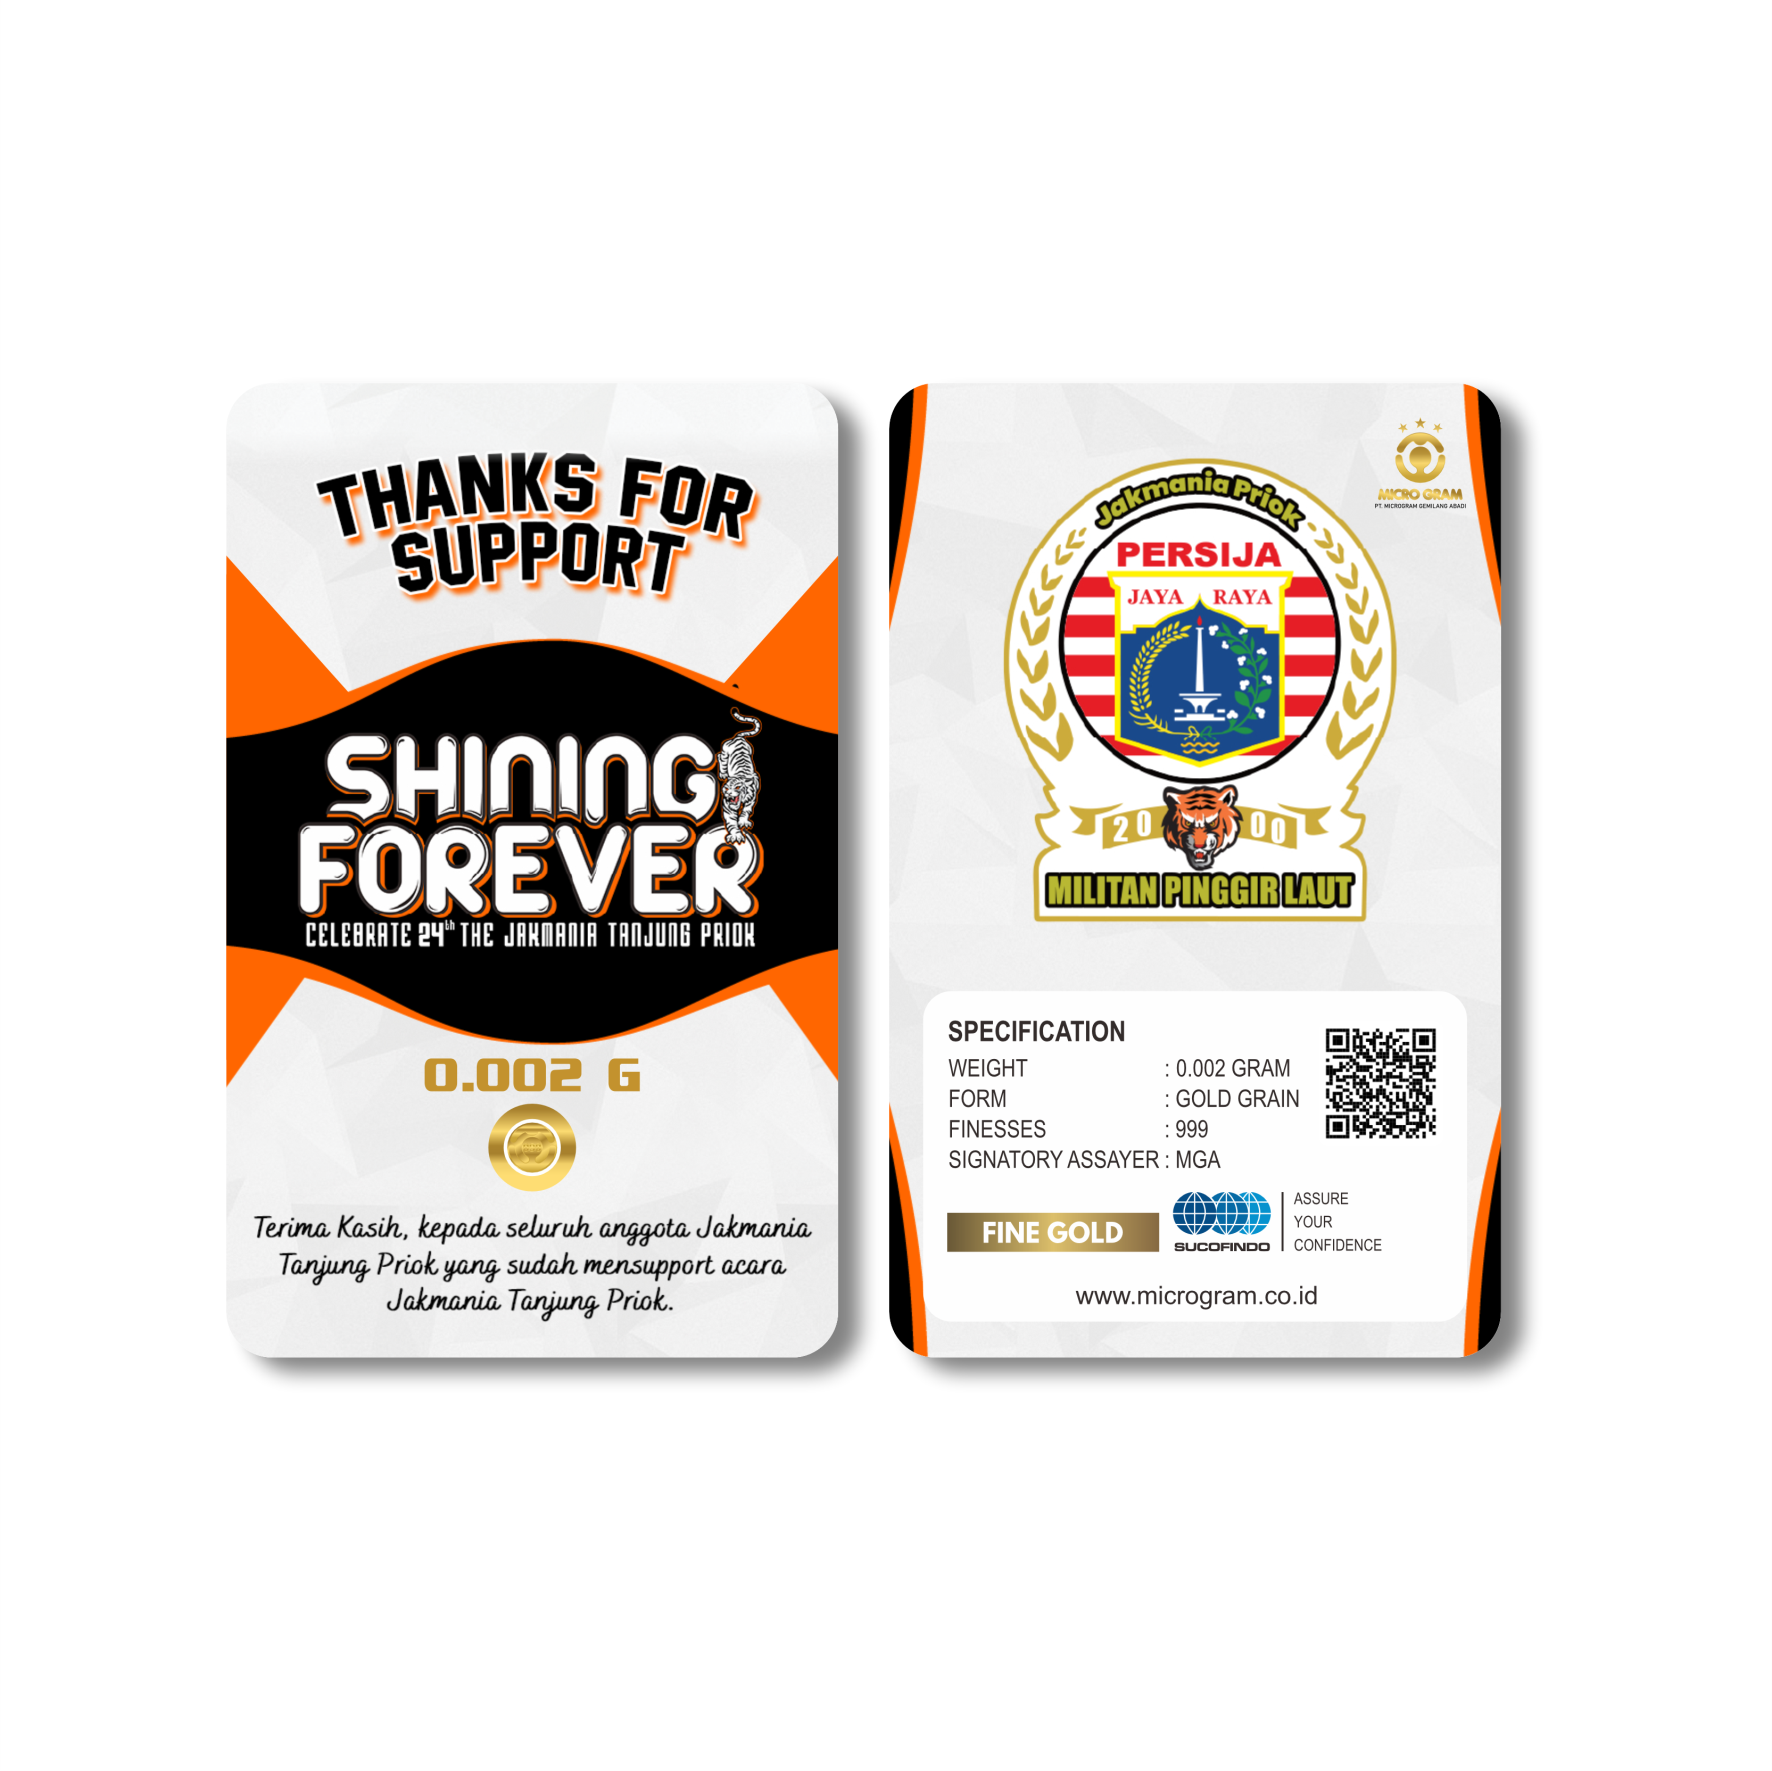 Shining Forever Celebrate 24Th The Jakmania Tanjung Priok